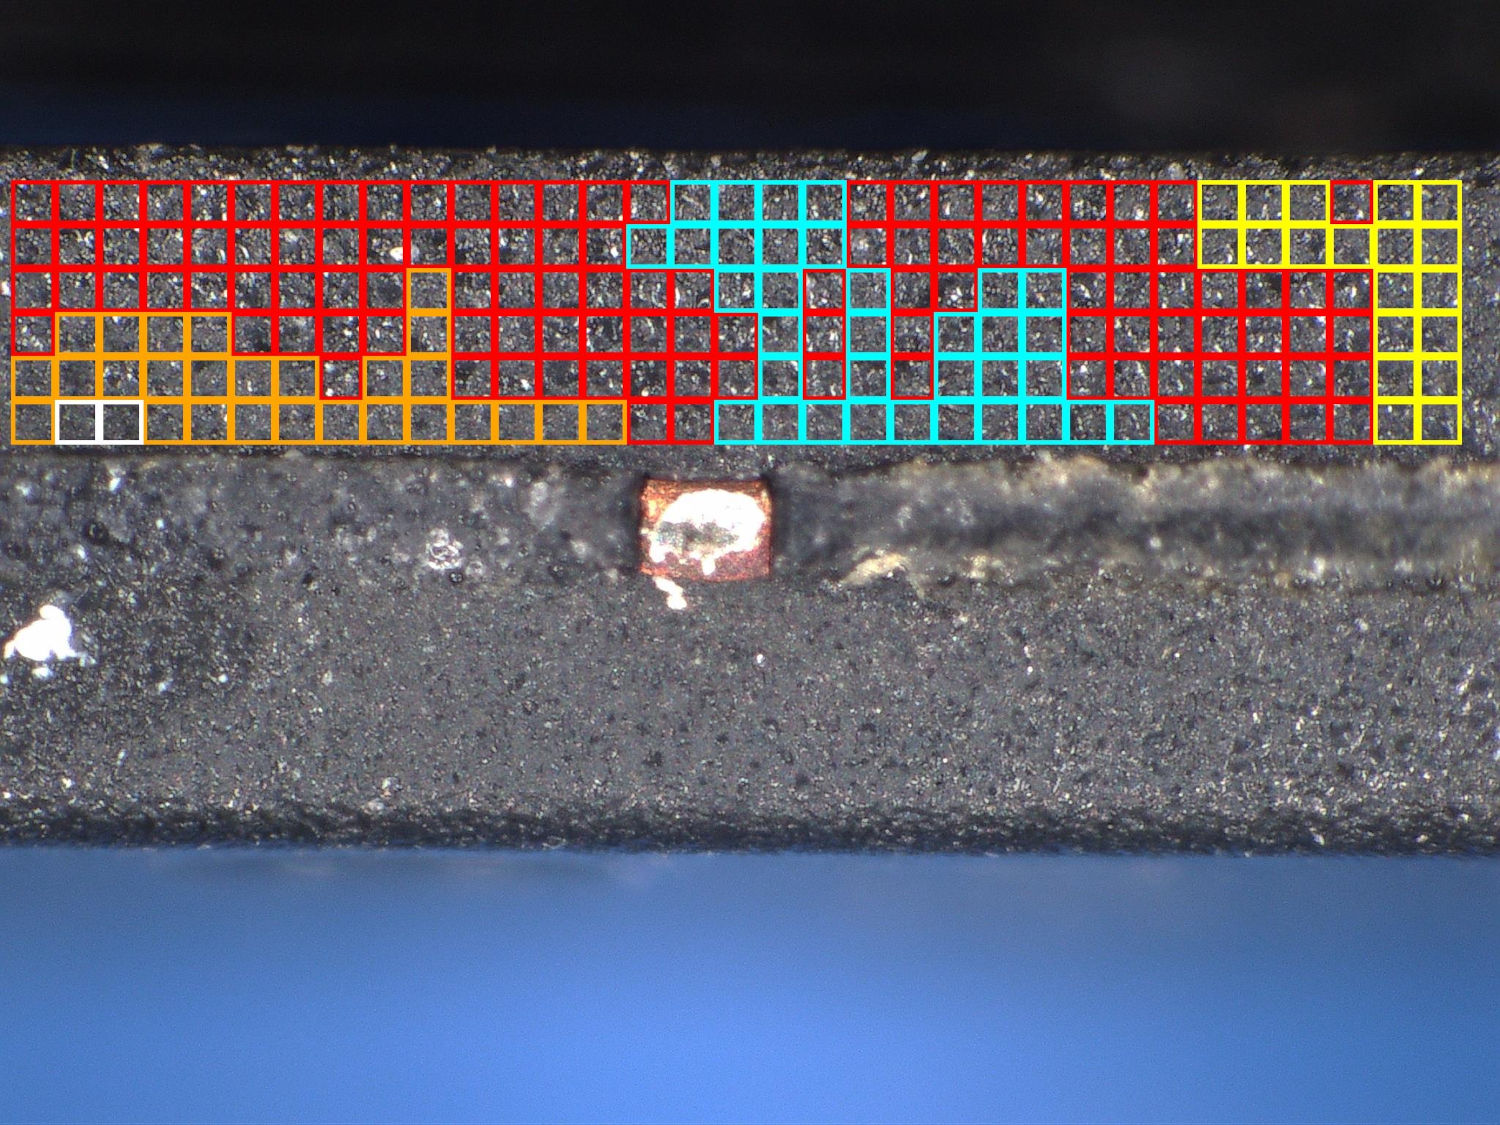 A close-up image showing a rectangular microchip with the top layer revealing a grid pattern of red, blue, and yellow squares to show color differences.